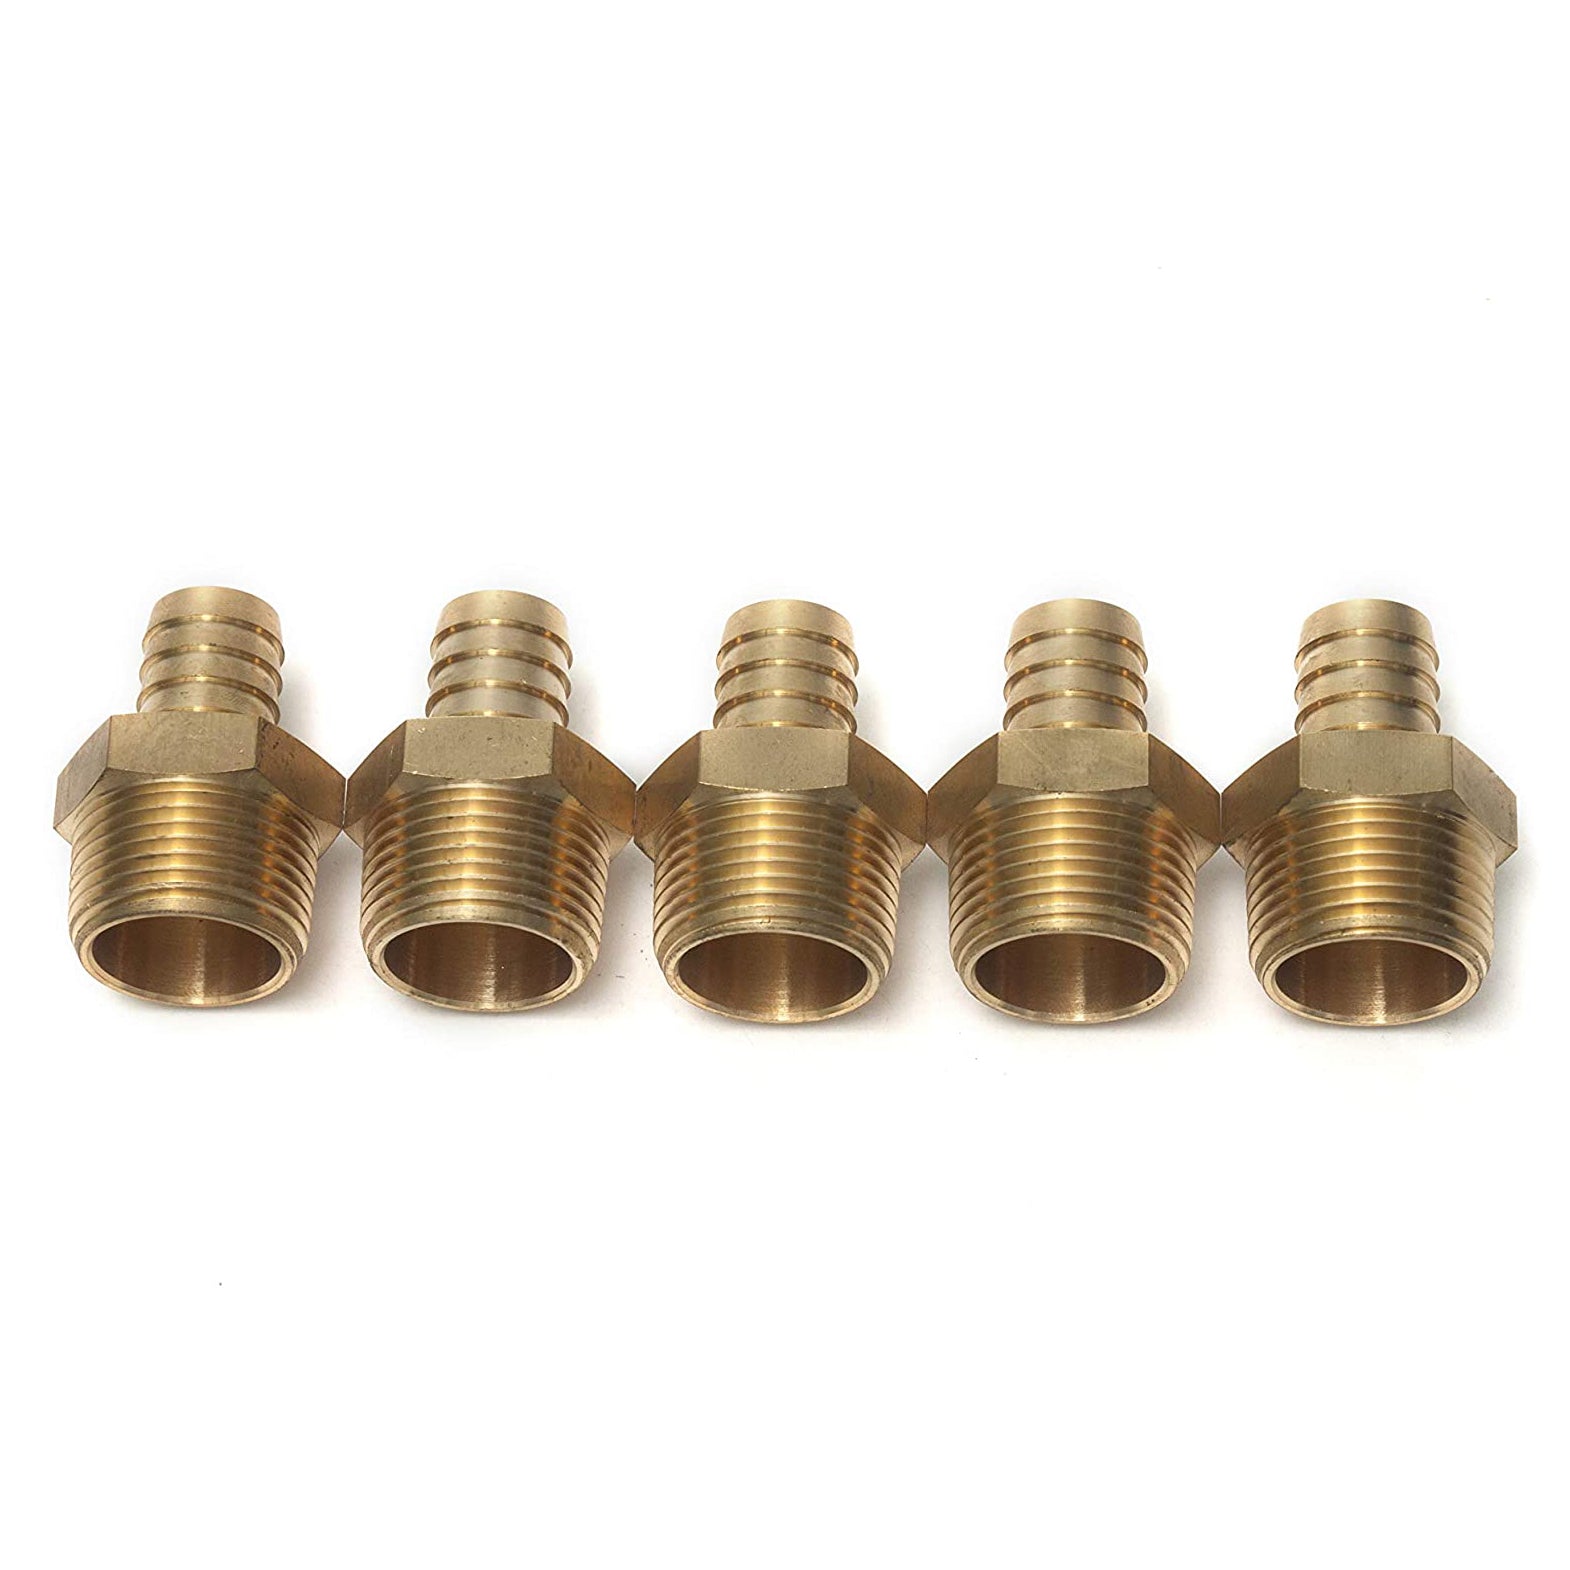 LTWFITTING Brass Barbed Fitting Coupler/Connector 3/8-Inch Male BSPT x 3/4-Inch(19mm) Hose Barb Fuel Gas Water (Pack of 5)